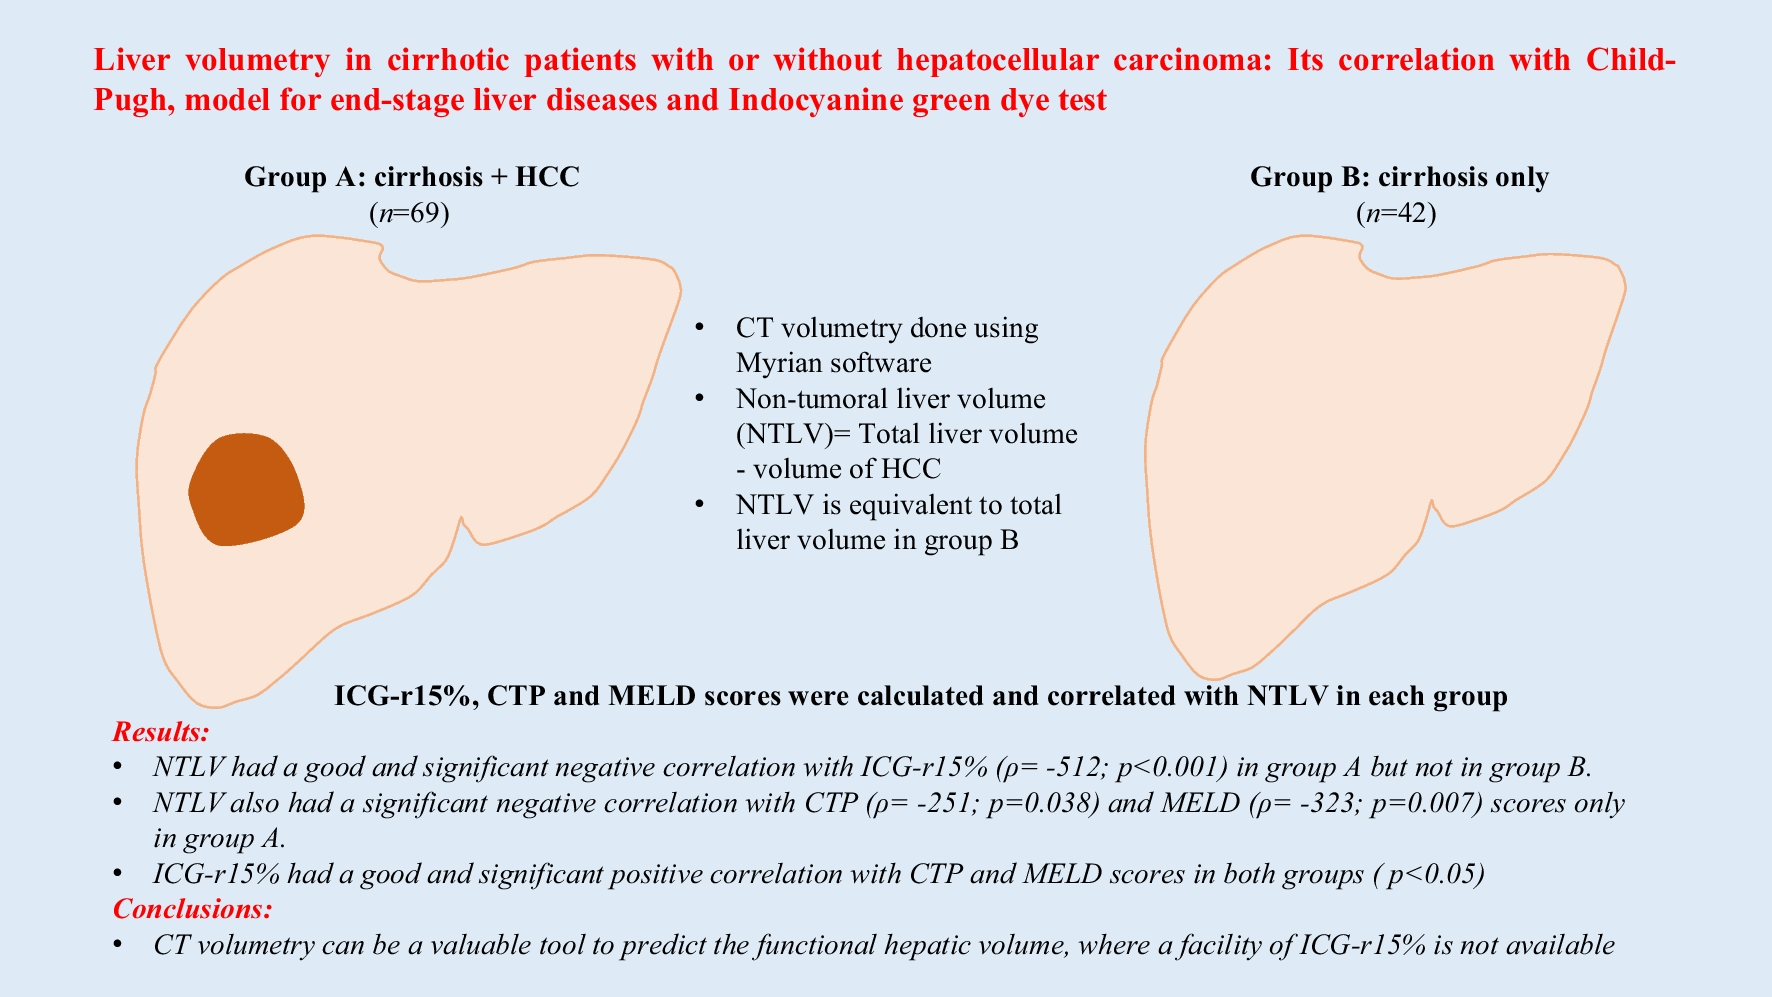 Liver volumetry in cirrhotic patients with or without hepatocellular carcinoma: Its correlation with Child–Pugh, model for end-stage liver diseases and indocyanine green dye test